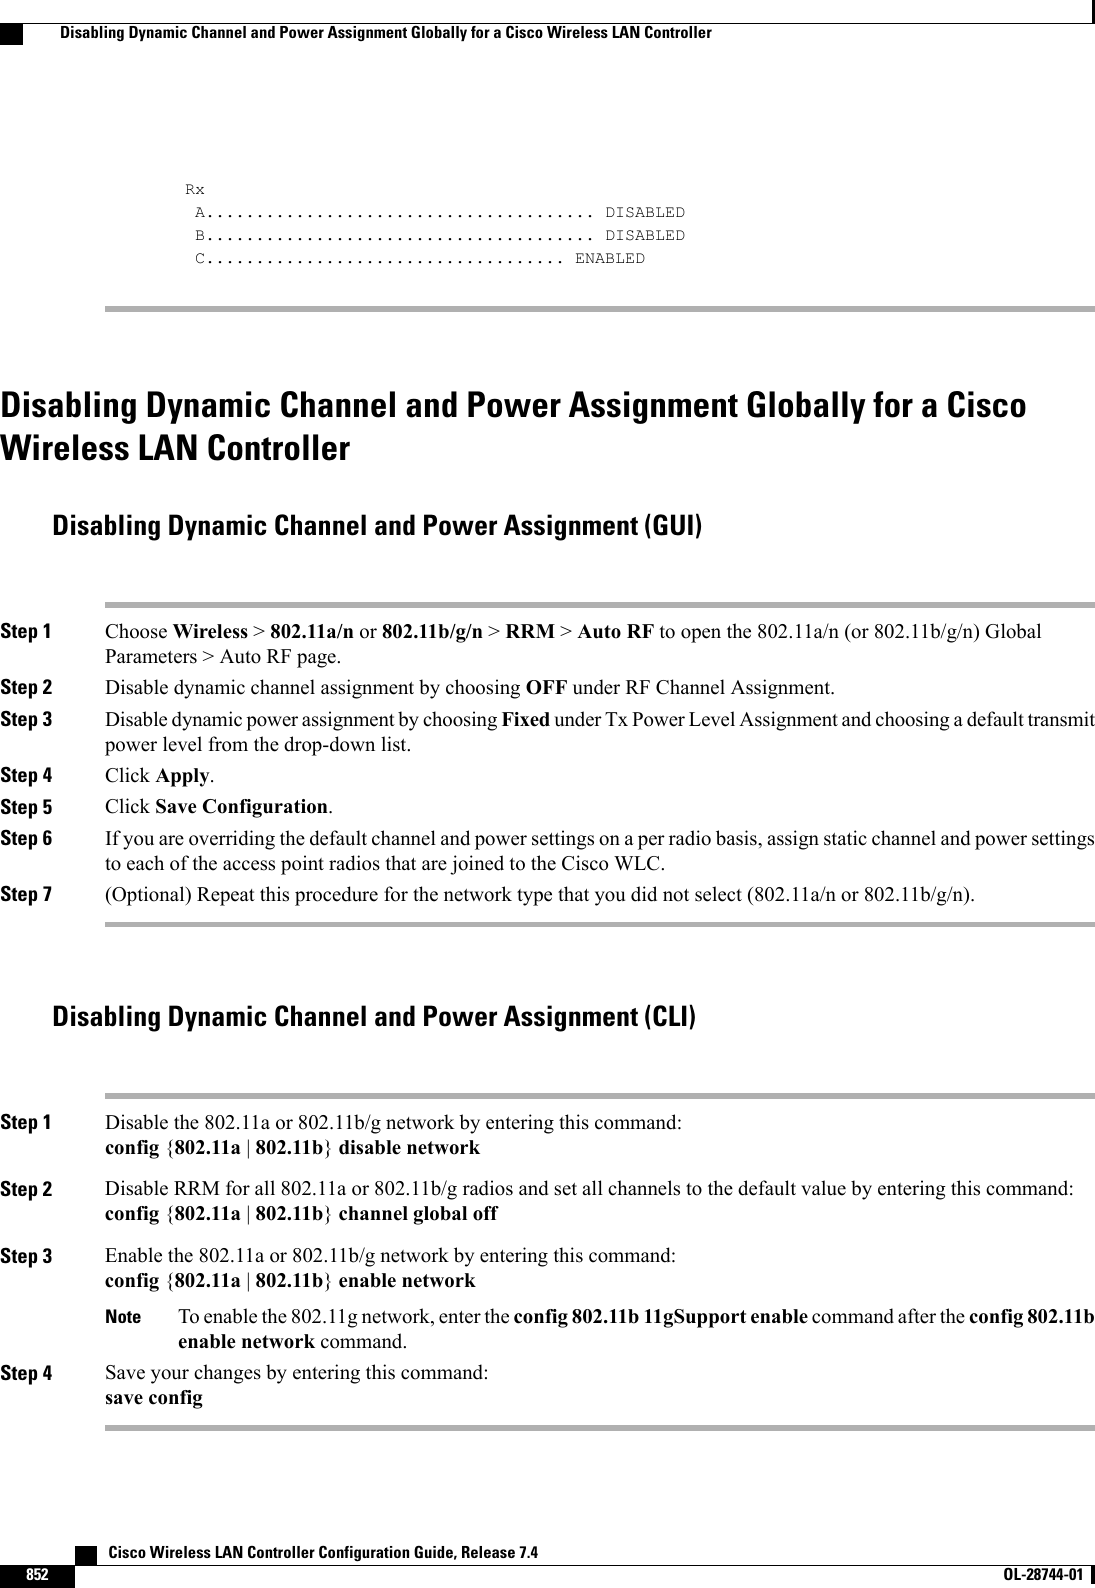 RxA....................................... DISABLEDB....................................... DISABLEDC.................................... ENABLEDDisabling Dynamic Channel and Power Assignment Globally for a CiscoWireless LAN ControllerDisabling Dynamic Channel and Power Assignment (GUI)Step 1 Choose Wireless &gt;802.11a/n or 802.11b/g/n &gt;RRM &gt;Auto RF to open the 802.11a/n (or 802.11b/g/n) GlobalParameters &gt; Auto RF page.Step 2 Disable dynamic channel assignment by choosing OFF under RF Channel Assignment.Step 3 Disable dynamic power assignment by choosing Fixed under Tx Power Level Assignment and choosing a default transmitpower level from the drop-down list.Step 4 Click Apply.Step 5 Click Save Configuration.Step 6 If you are overriding the default channel and power settings on a per radio basis, assign static channel and power settingsto each of the access point radios that are joined to the Cisco WLC.Step 7 (Optional) Repeat this procedure for the network type that you did not select (802.11a/n or 802.11b/g/n).Disabling Dynamic Channel and Power Assignment (CLI)Step 1 Disable the 802.11a or 802.11b/g network by entering this command:config {802.11a |802.11b}disable networkStep 2 Disable RRM for all 802.11a or 802.11b/g radios and set all channels to the default value by entering this command:config {802.11a |802.11b}channel global offStep 3 Enable the 802.11a or 802.11b/g network by entering this command:config {802.11a |802.11b}enable networkTo enable the 802.11g network, enter the config 802.11b 11gSupport enable command after the config 802.11benable network command.NoteStep 4 Save your changes by entering this command:save config   Cisco Wireless LAN Controller Configuration Guide, Release 7.4852 OL-28744-01  Disabling Dynamic Channel and Power Assignment Globally for a Cisco Wireless LAN Controller